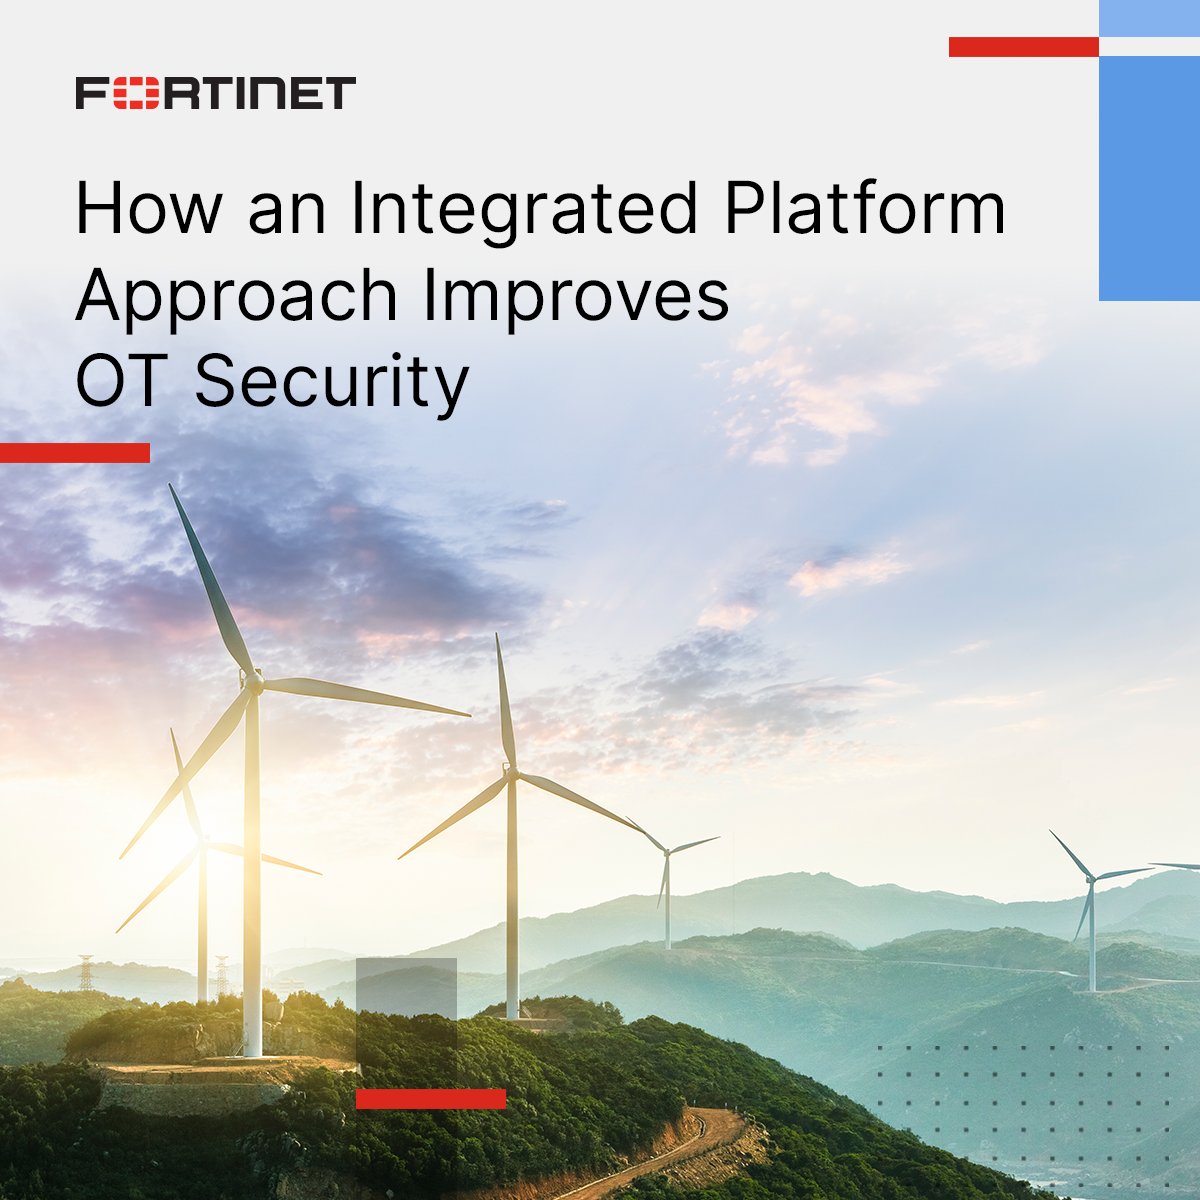 🔎 Increased Visibility
⚙️ Streamline Operations
🔐 Rapid Incident Response

Discover how @Fortinet's Unified #OTSecurity Framework fortifies your customers critical infrastructure while optimizing efficiency—without any operational downtime. ftnt.net/6018bWlqn